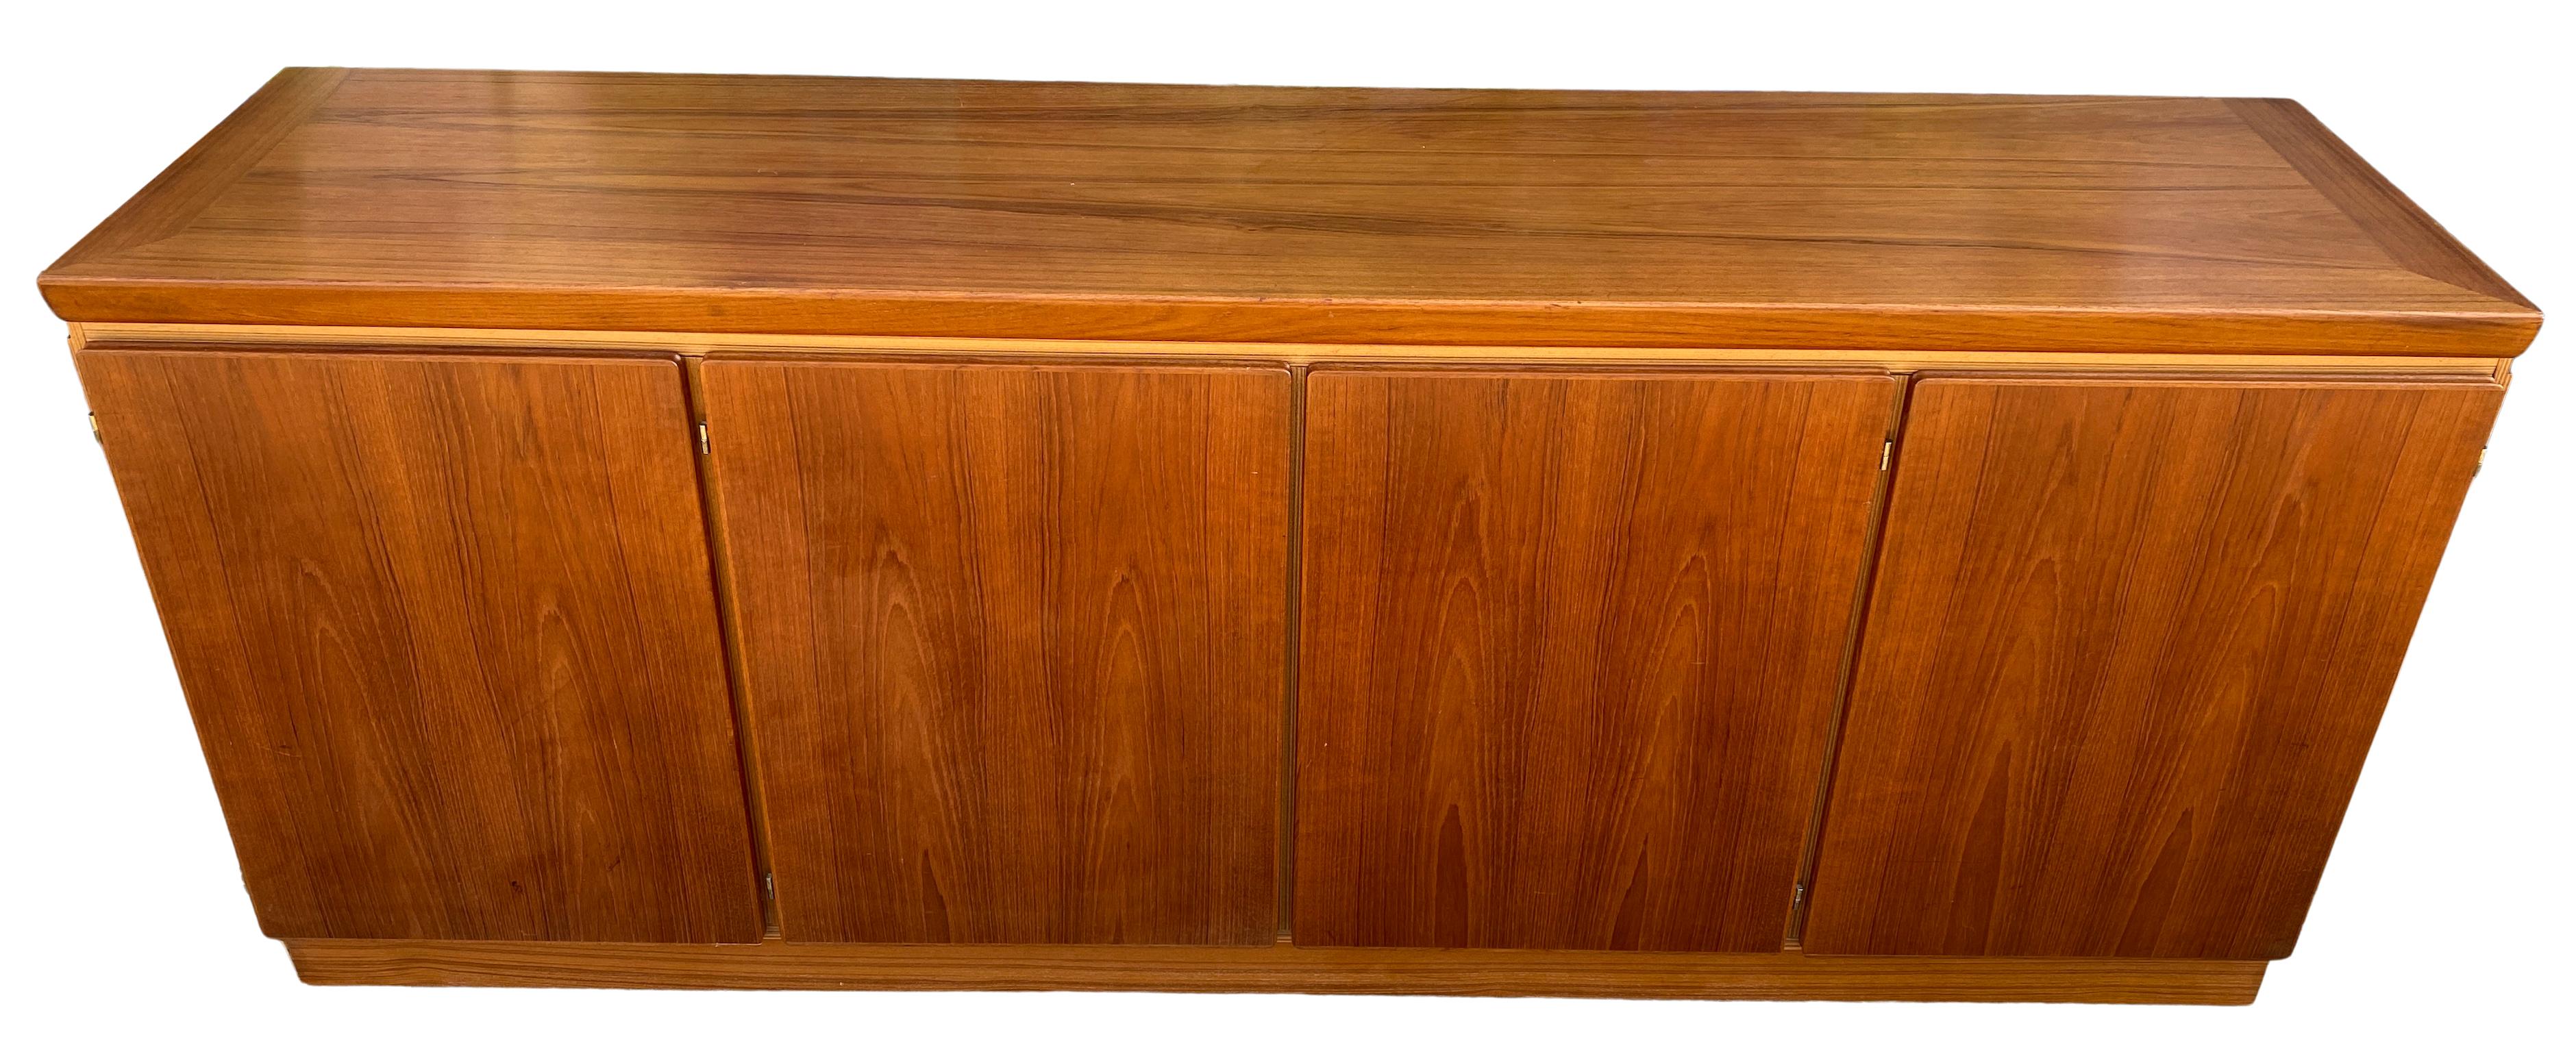 Midcentury long Danish modern teak credenza sideboard with 4 doors and 5 drawers also has 3 adjustable shelves. Very clean teak wood credenza with sculpted teak doors. Very clean midcentury Danish sideboard. Great looking all drawers are clean and